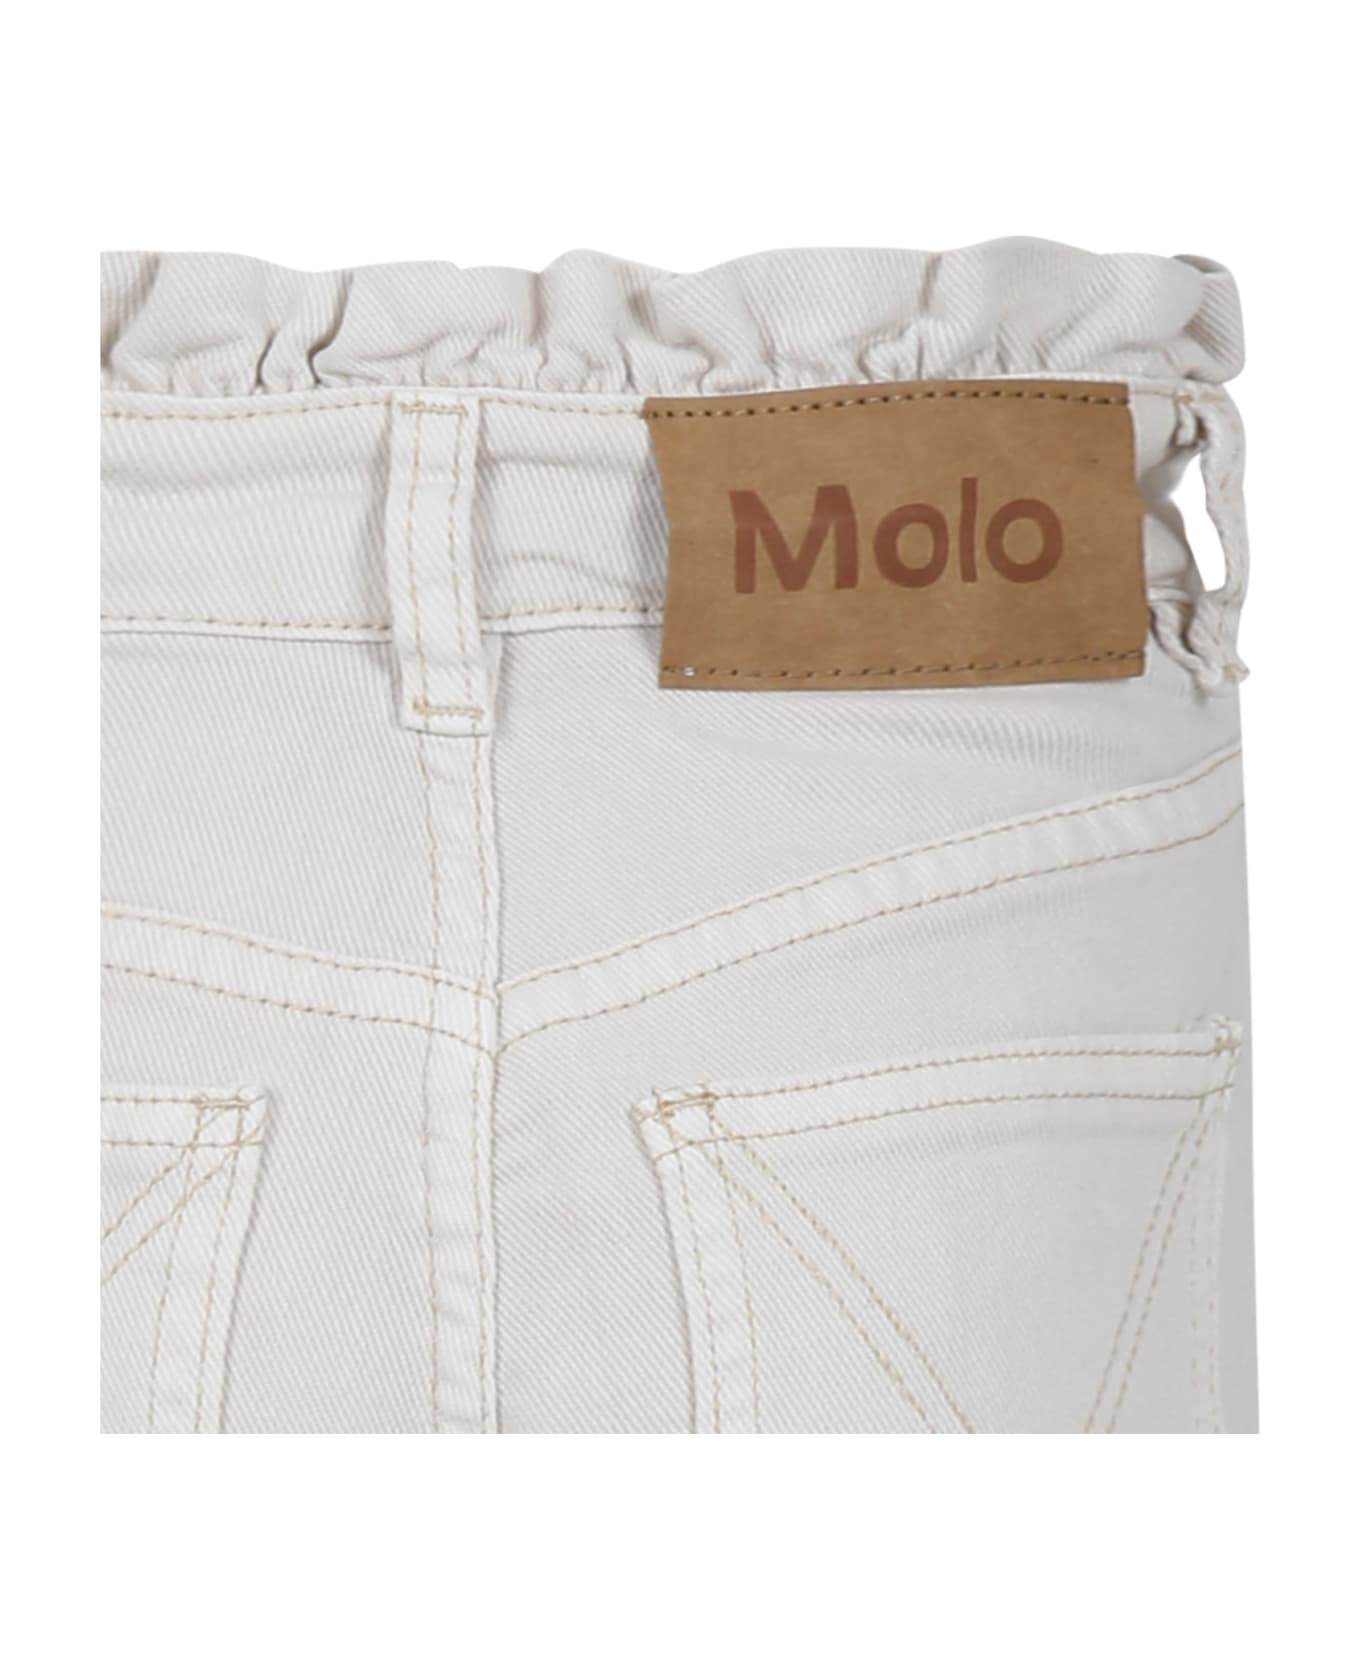 Molo Ivory Jeans For Girl - Ivory